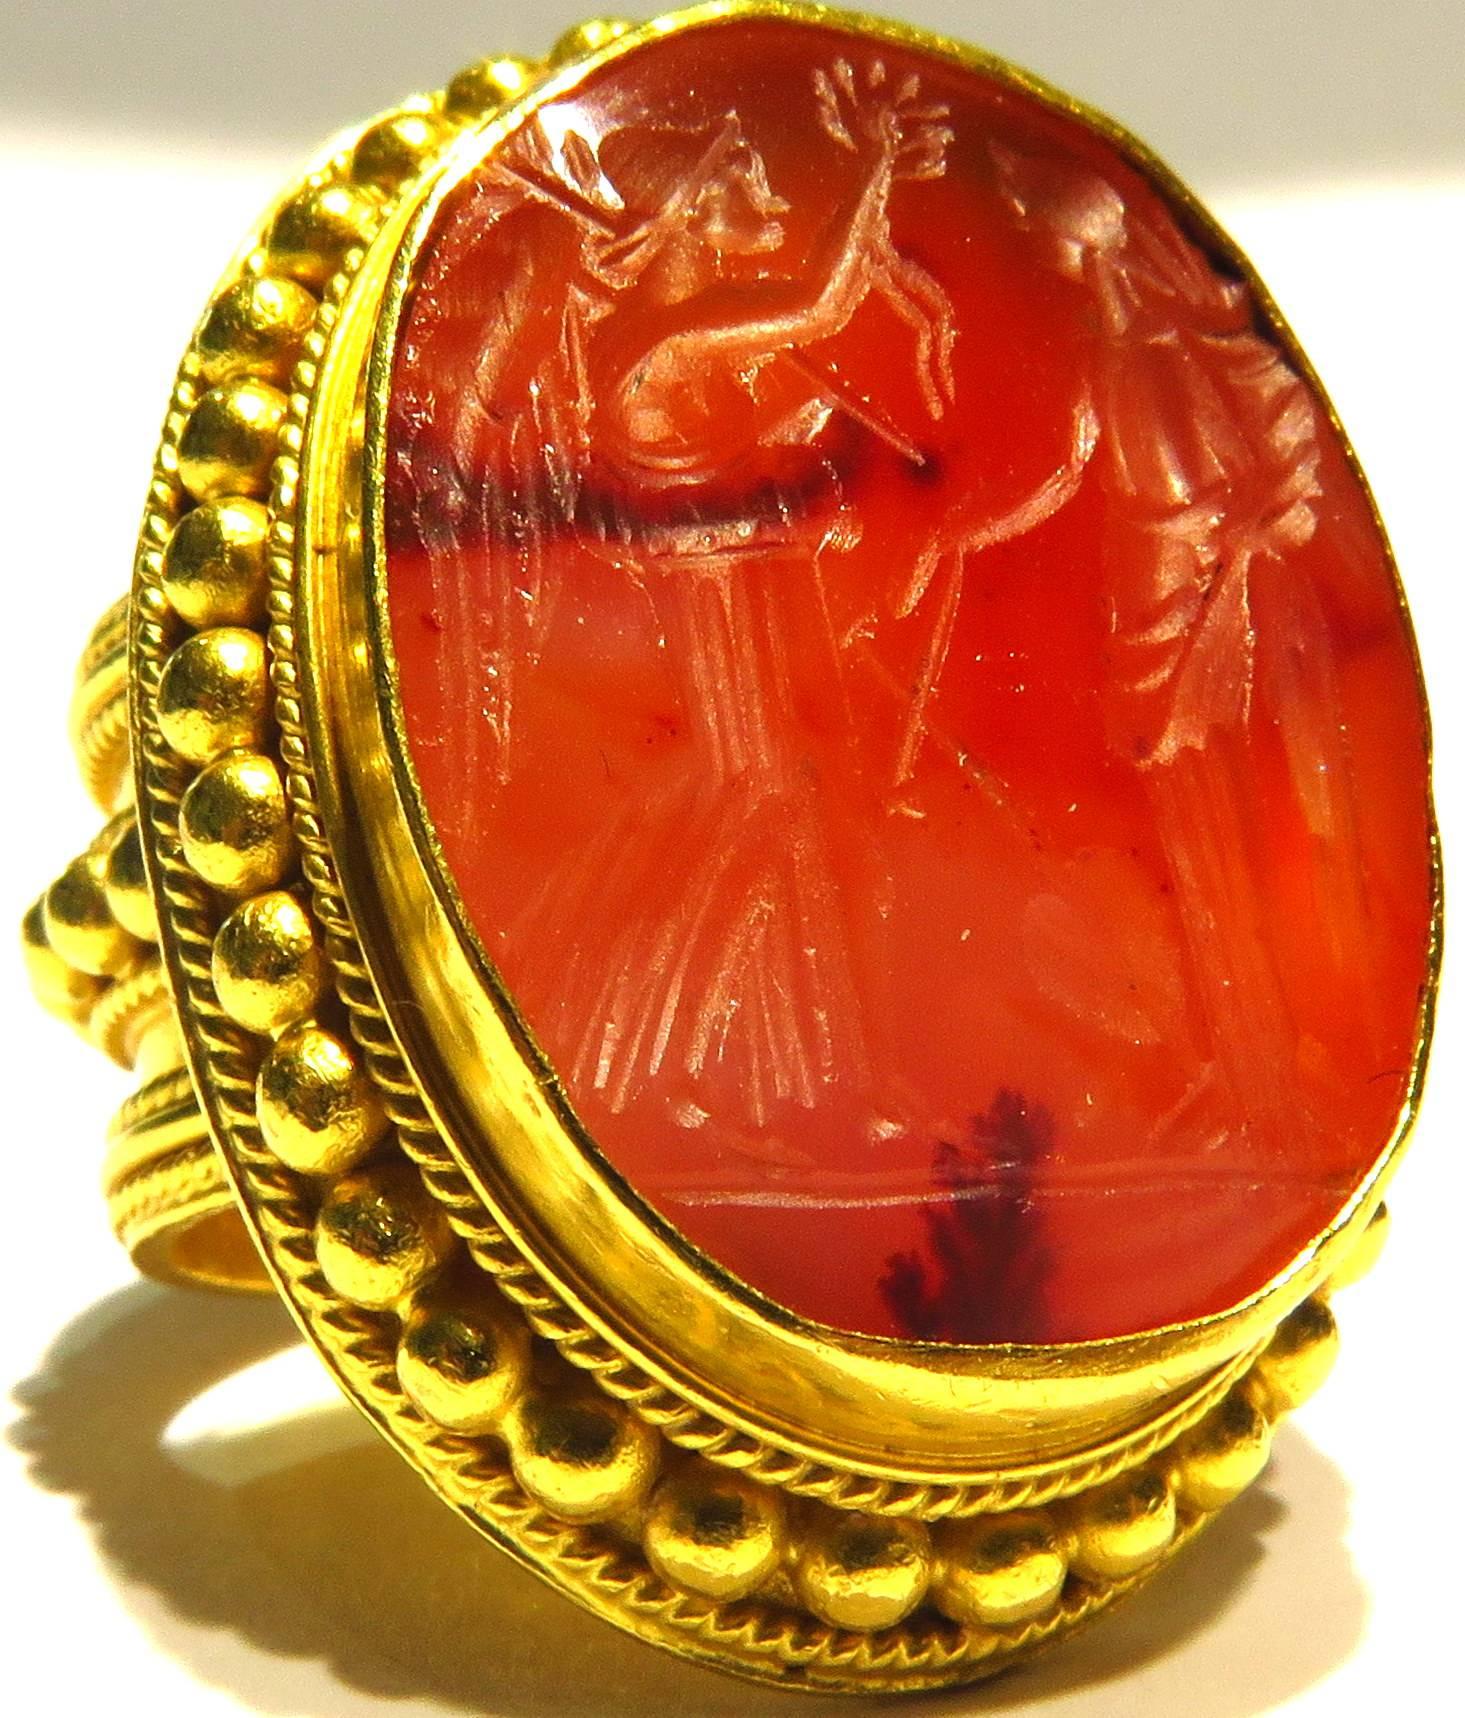 This is a very large exceptional antique seal ring mounted in 21K gold. There is a makers mark as shown in image 6 that I can not make out and on the other side, image # 7, is the 21K mark. The seal stone is a rare carnelian agate. The Etruscan